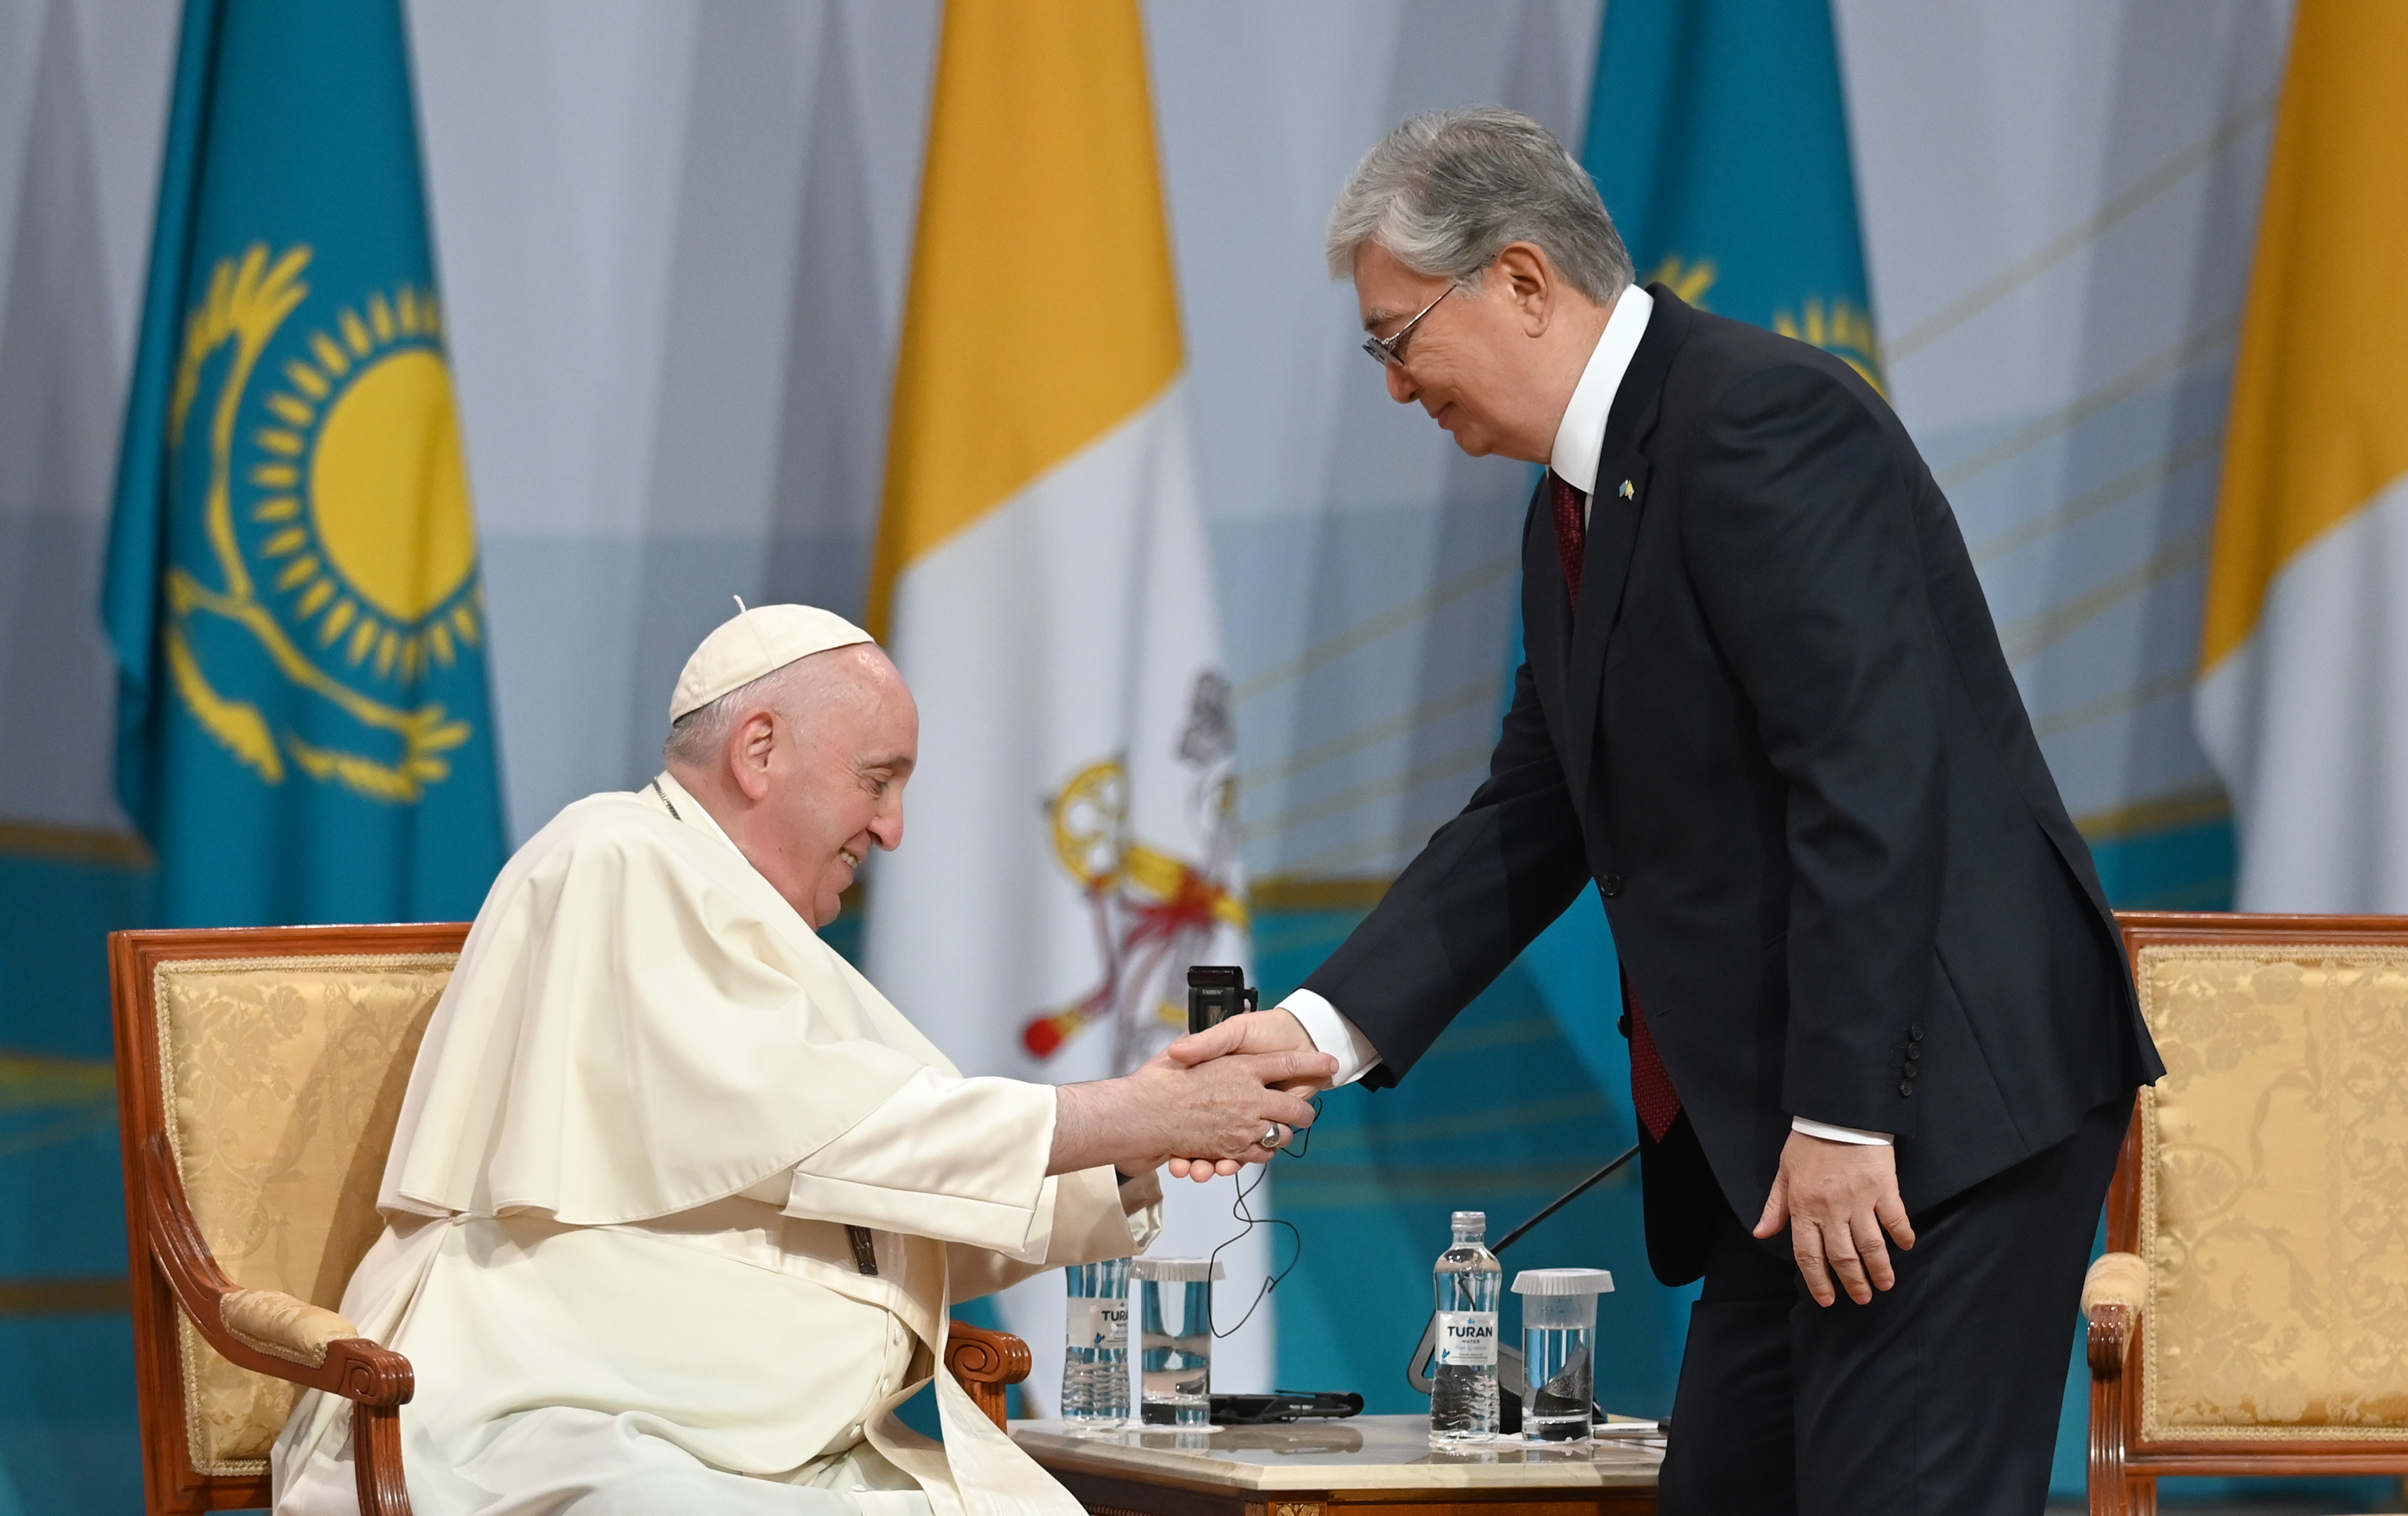 Kassym-Jomart Tokayev and Pope Francis held a meeting with representatives of civil society and the diplomatic corps